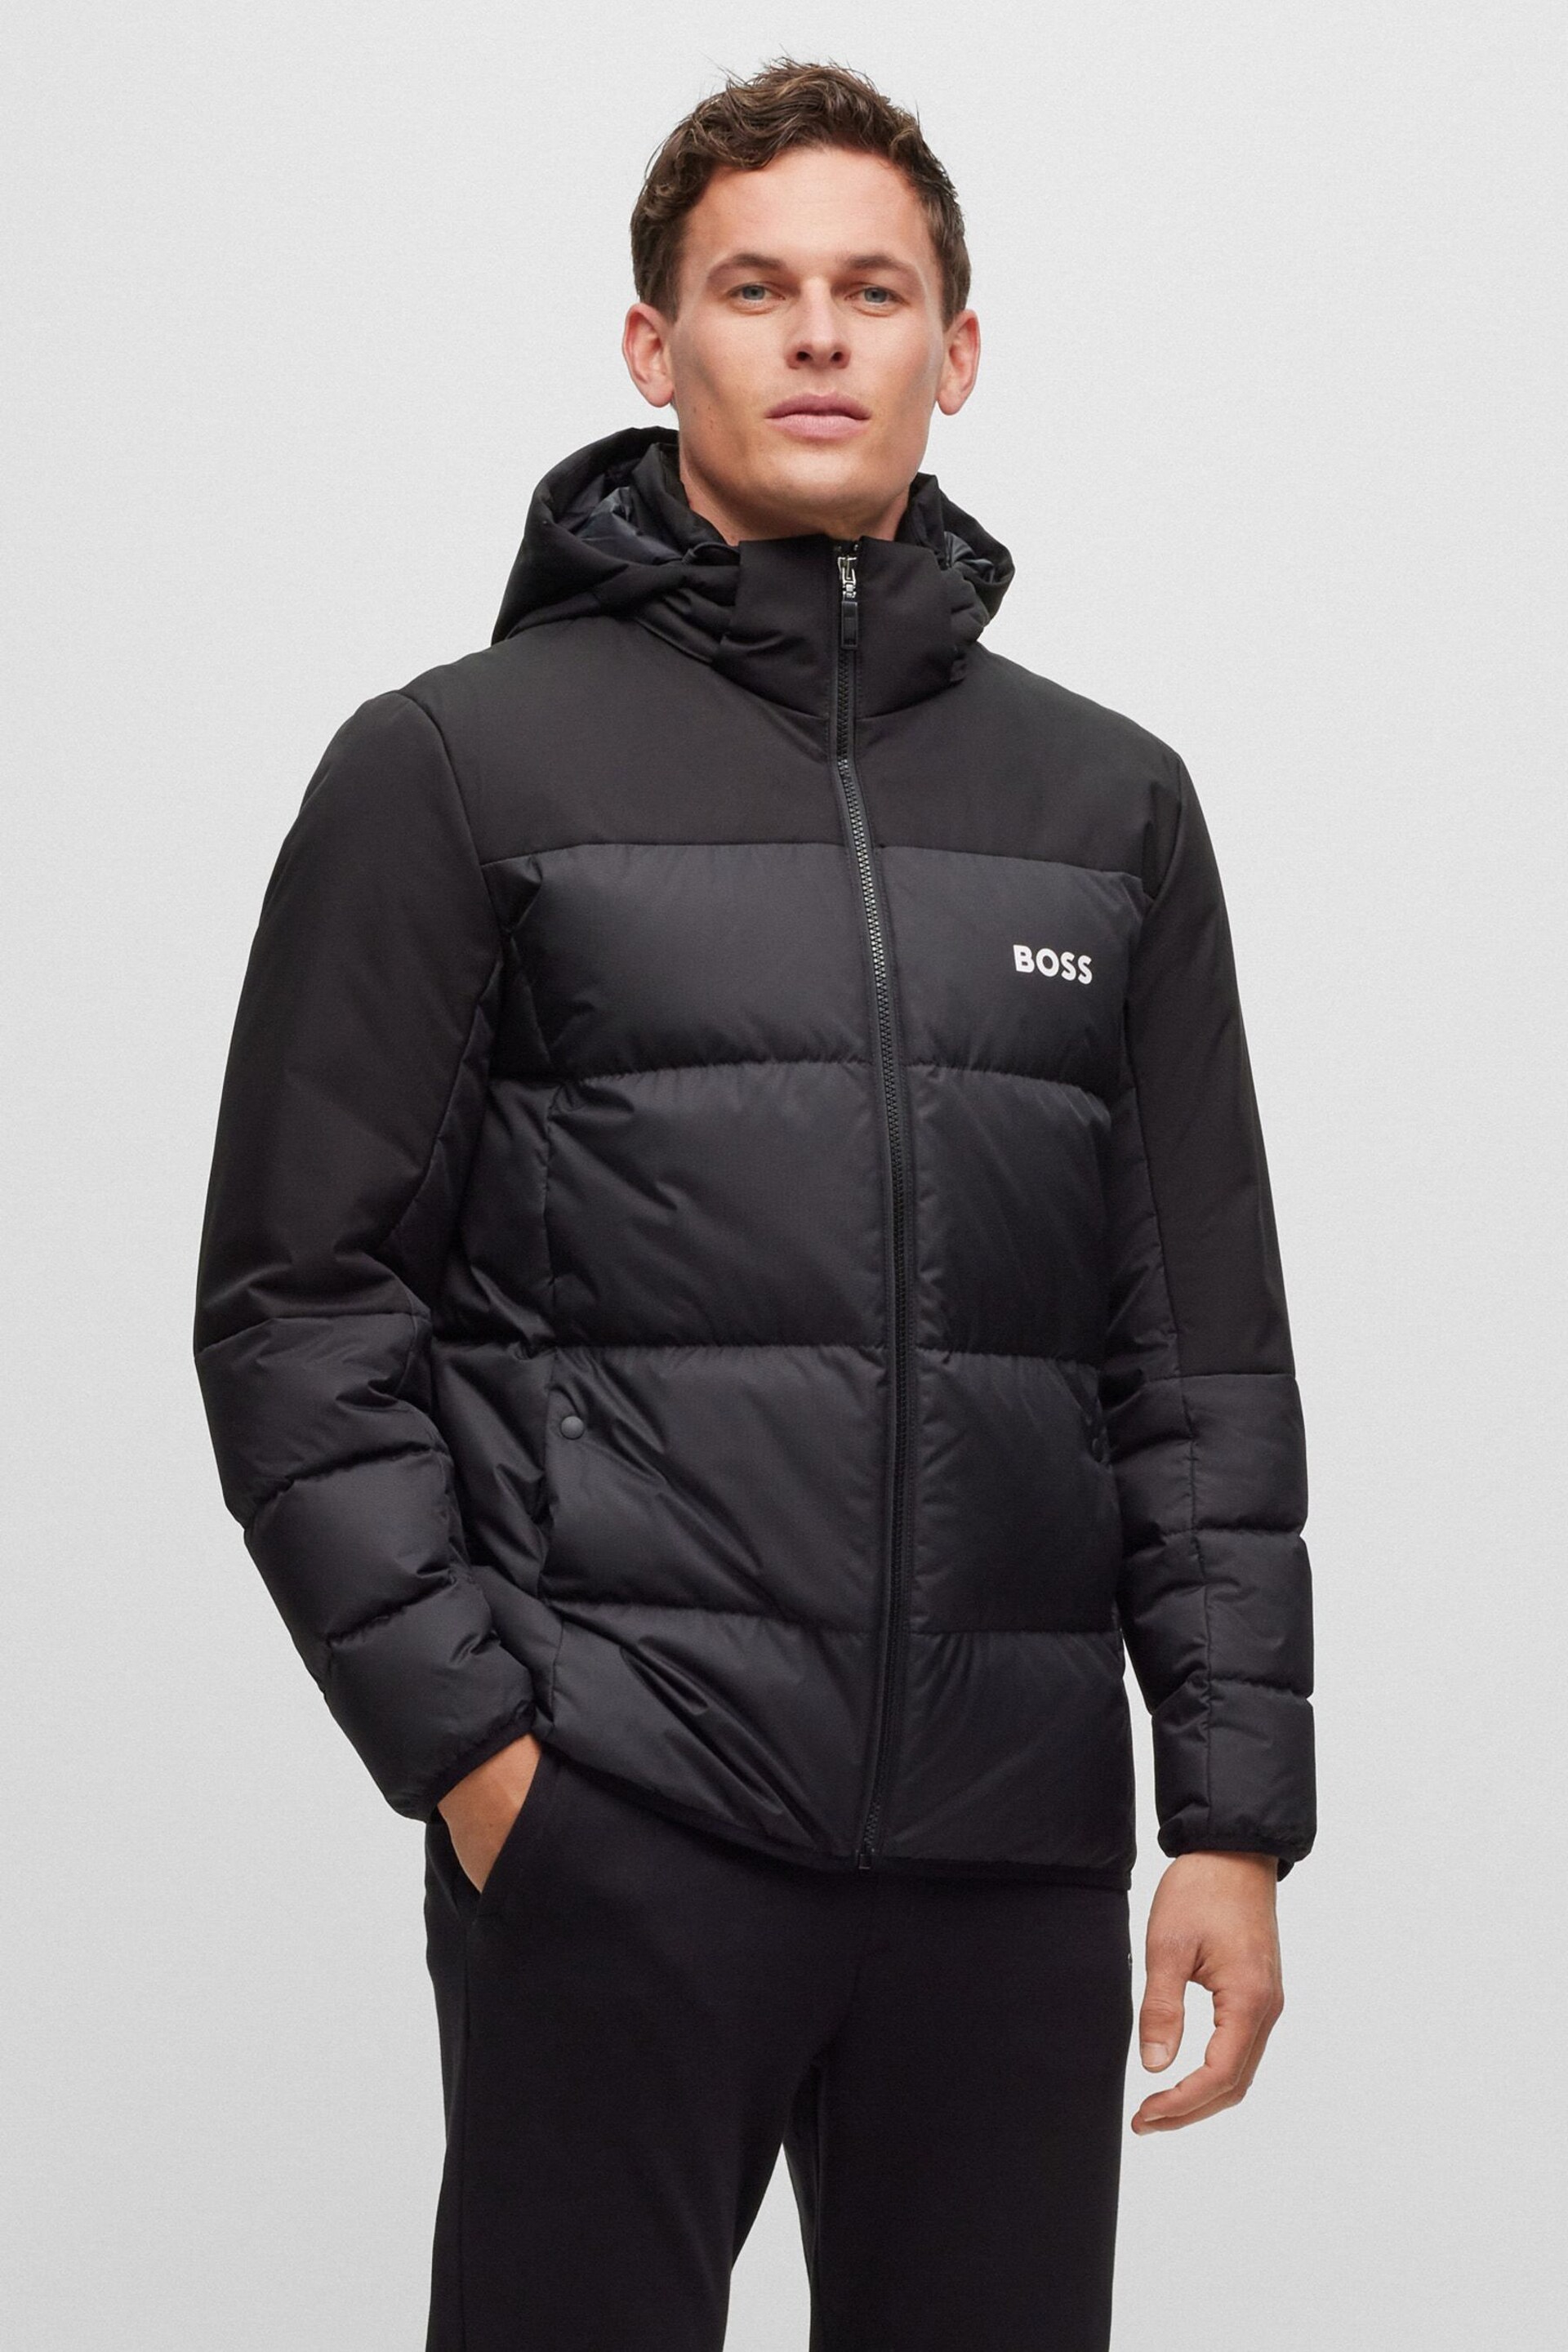 BOSS Black Water Repellent Hooded Down Puffer Jacket - Image 1 of 5